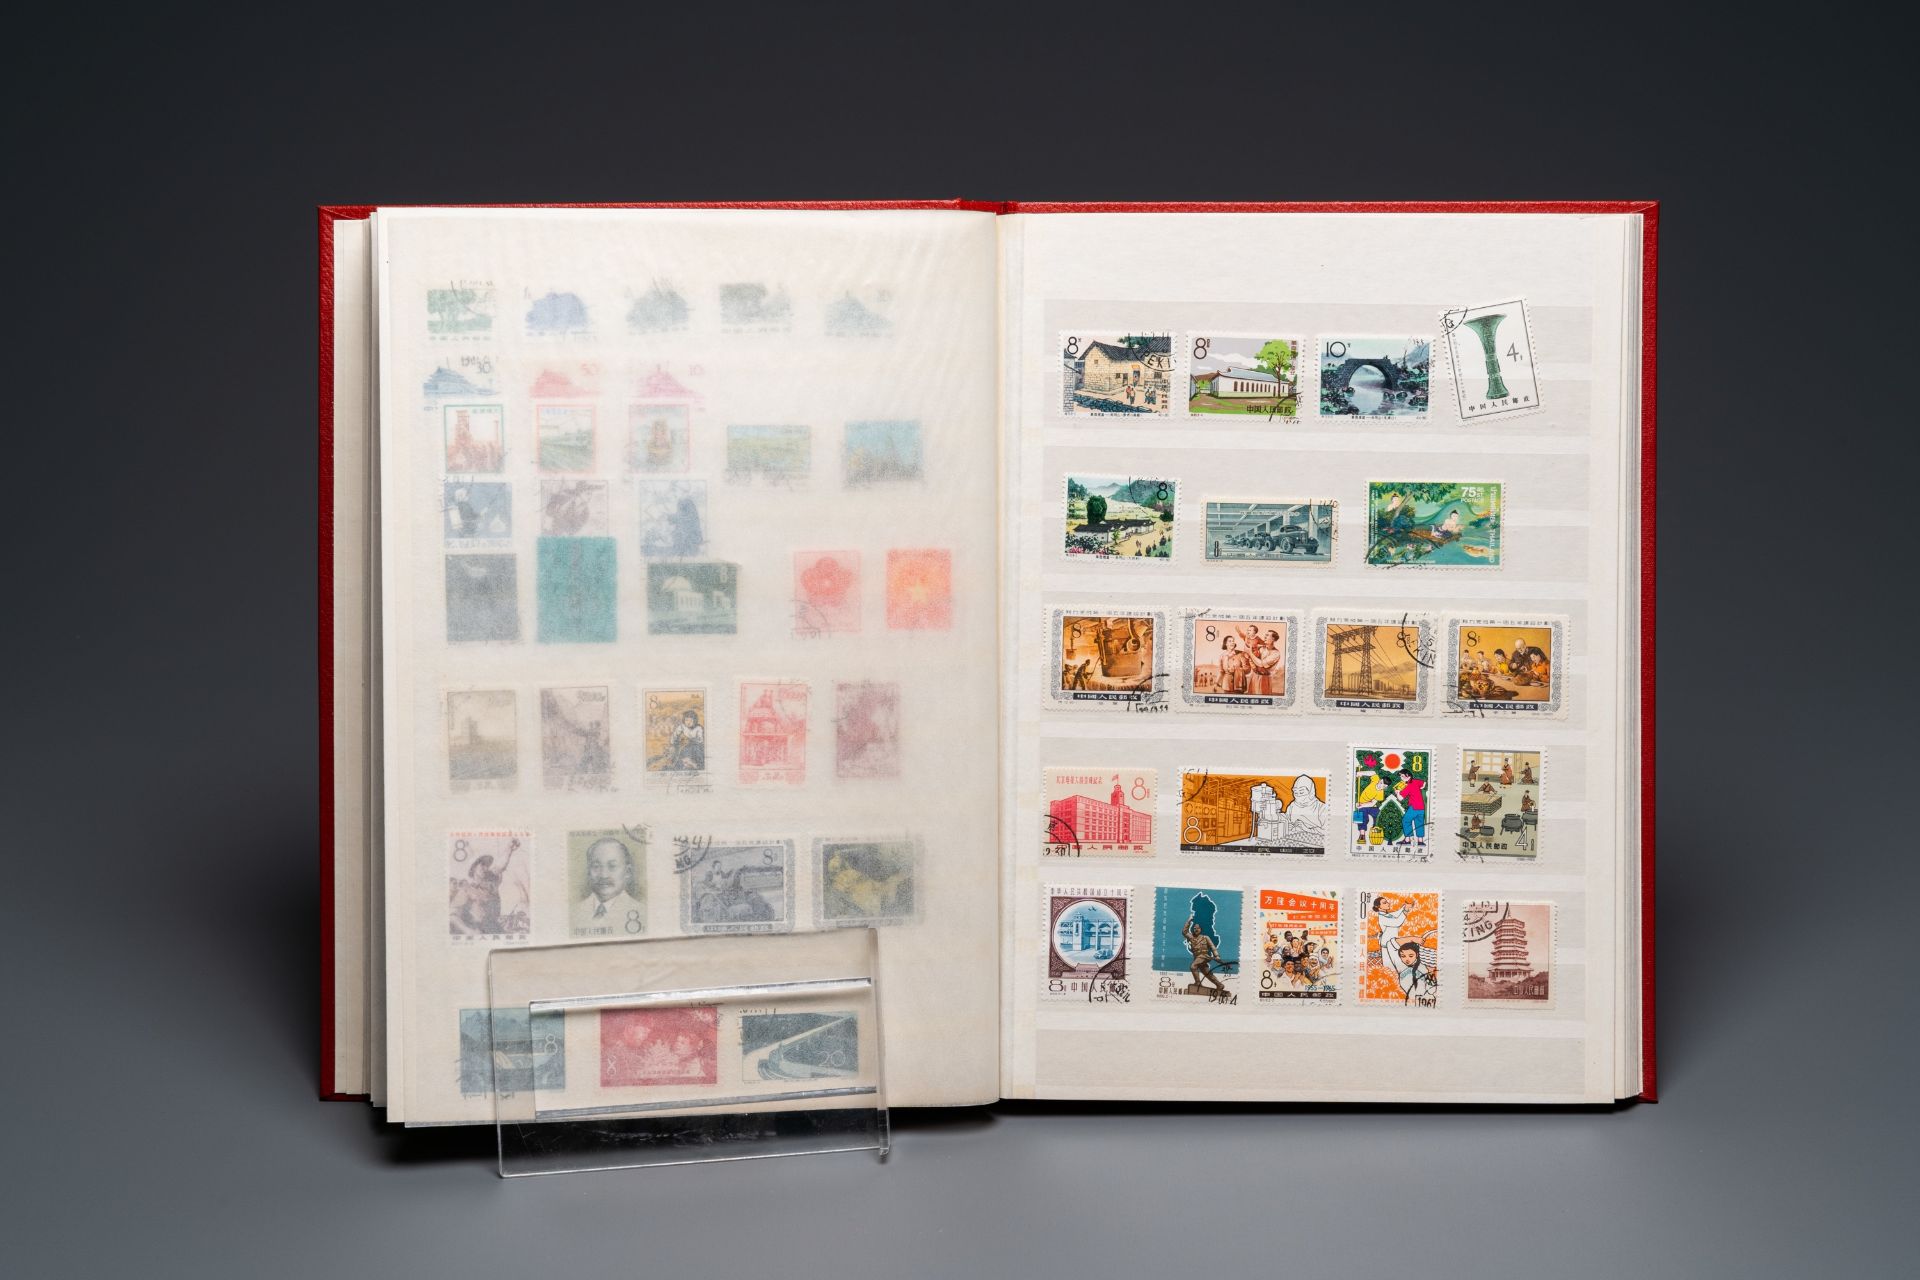 An album of Chinese postal stamps, 20th C. - Image 11 of 14